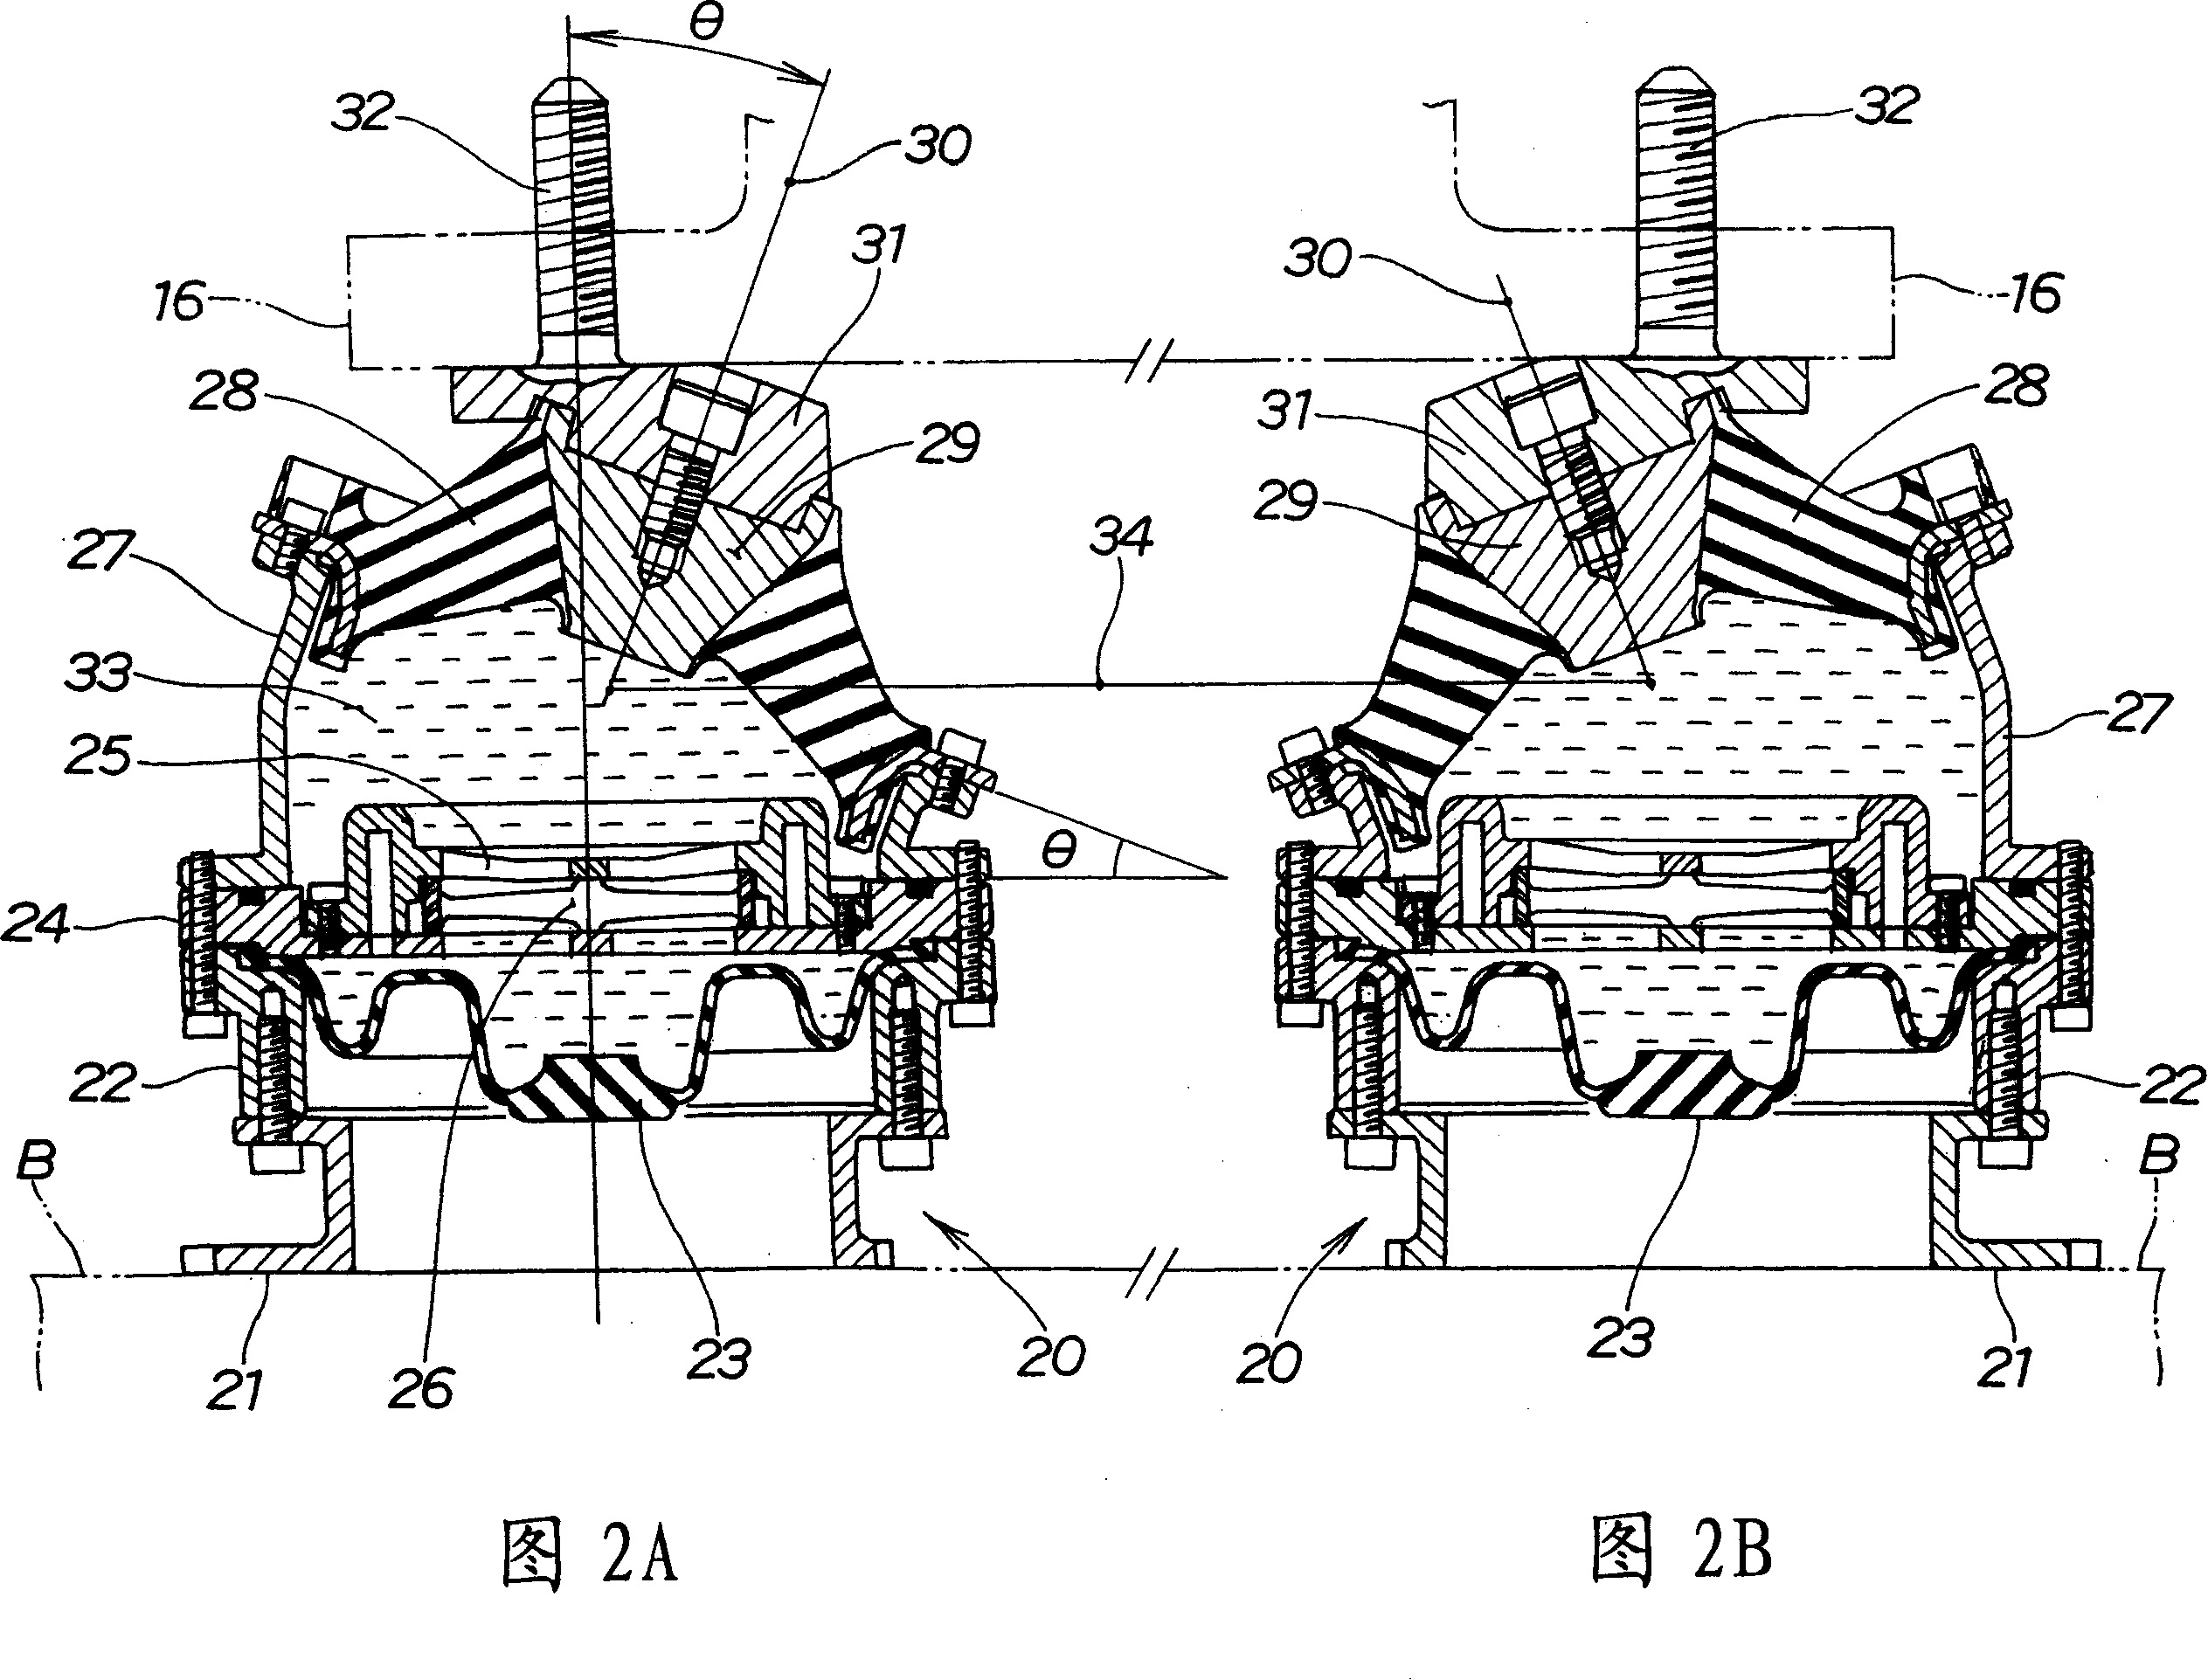 Supporting structure of transverse engine